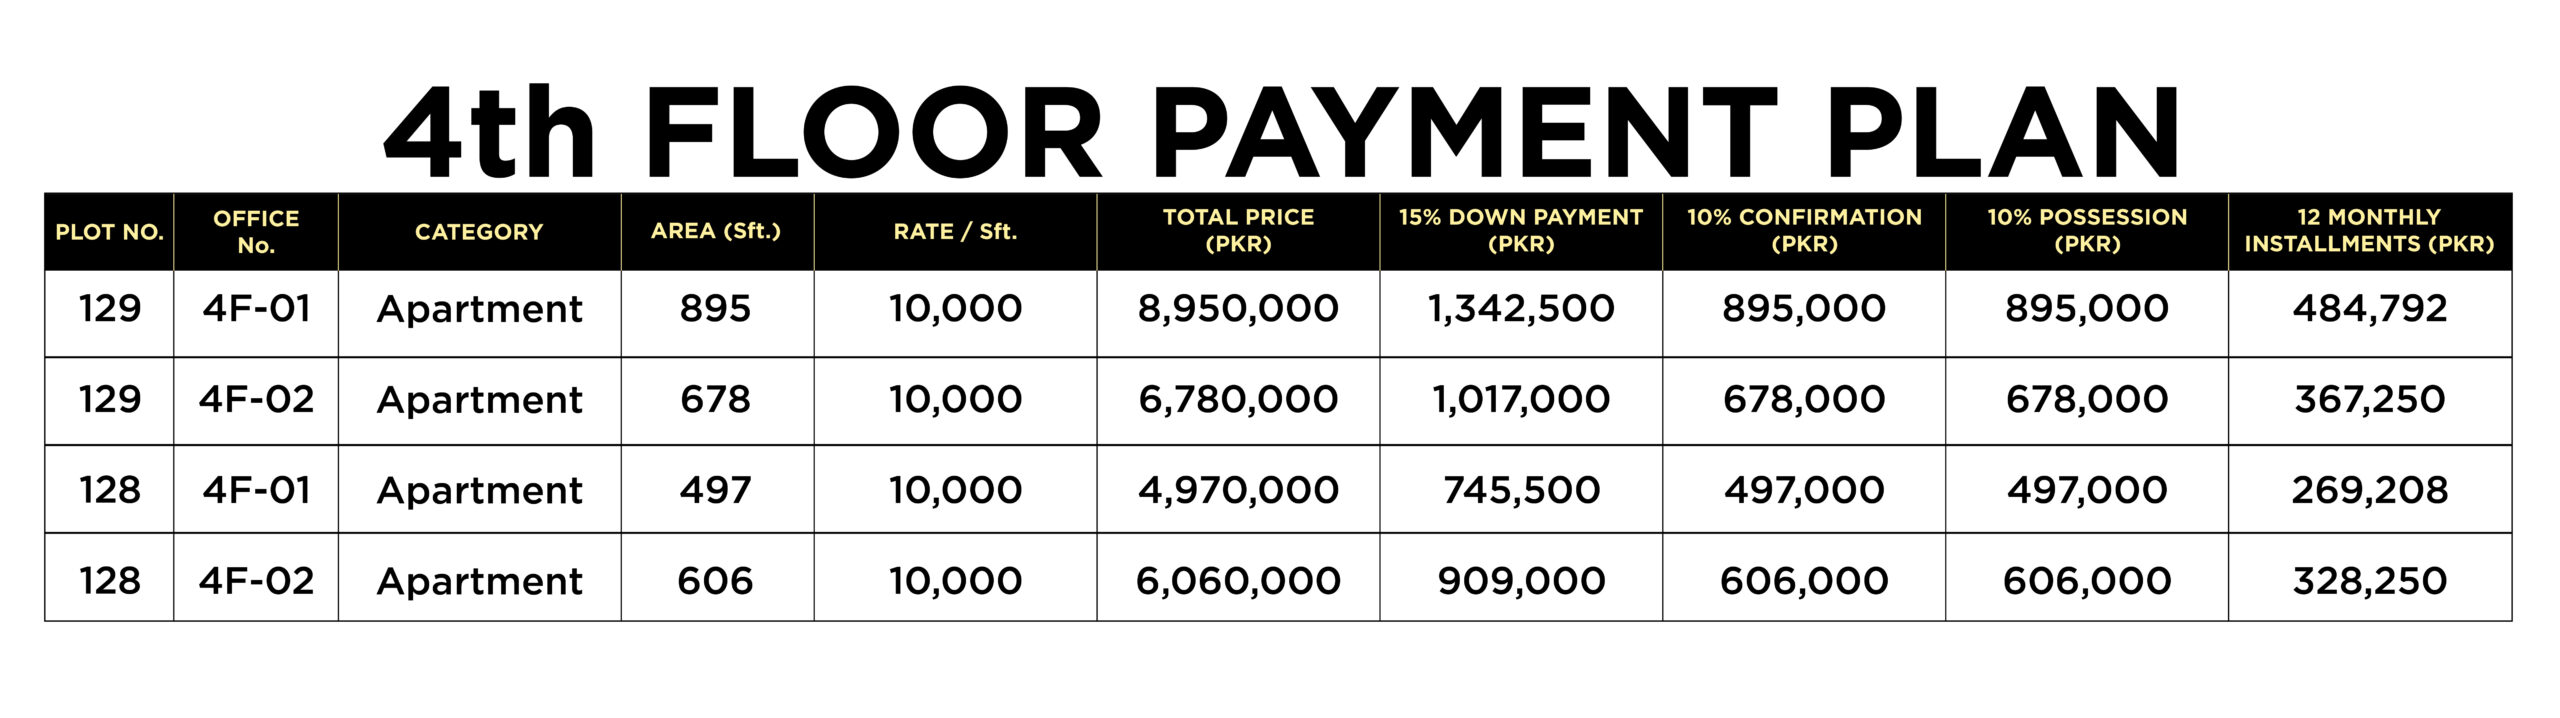 4th floor sapphire heights payment plan